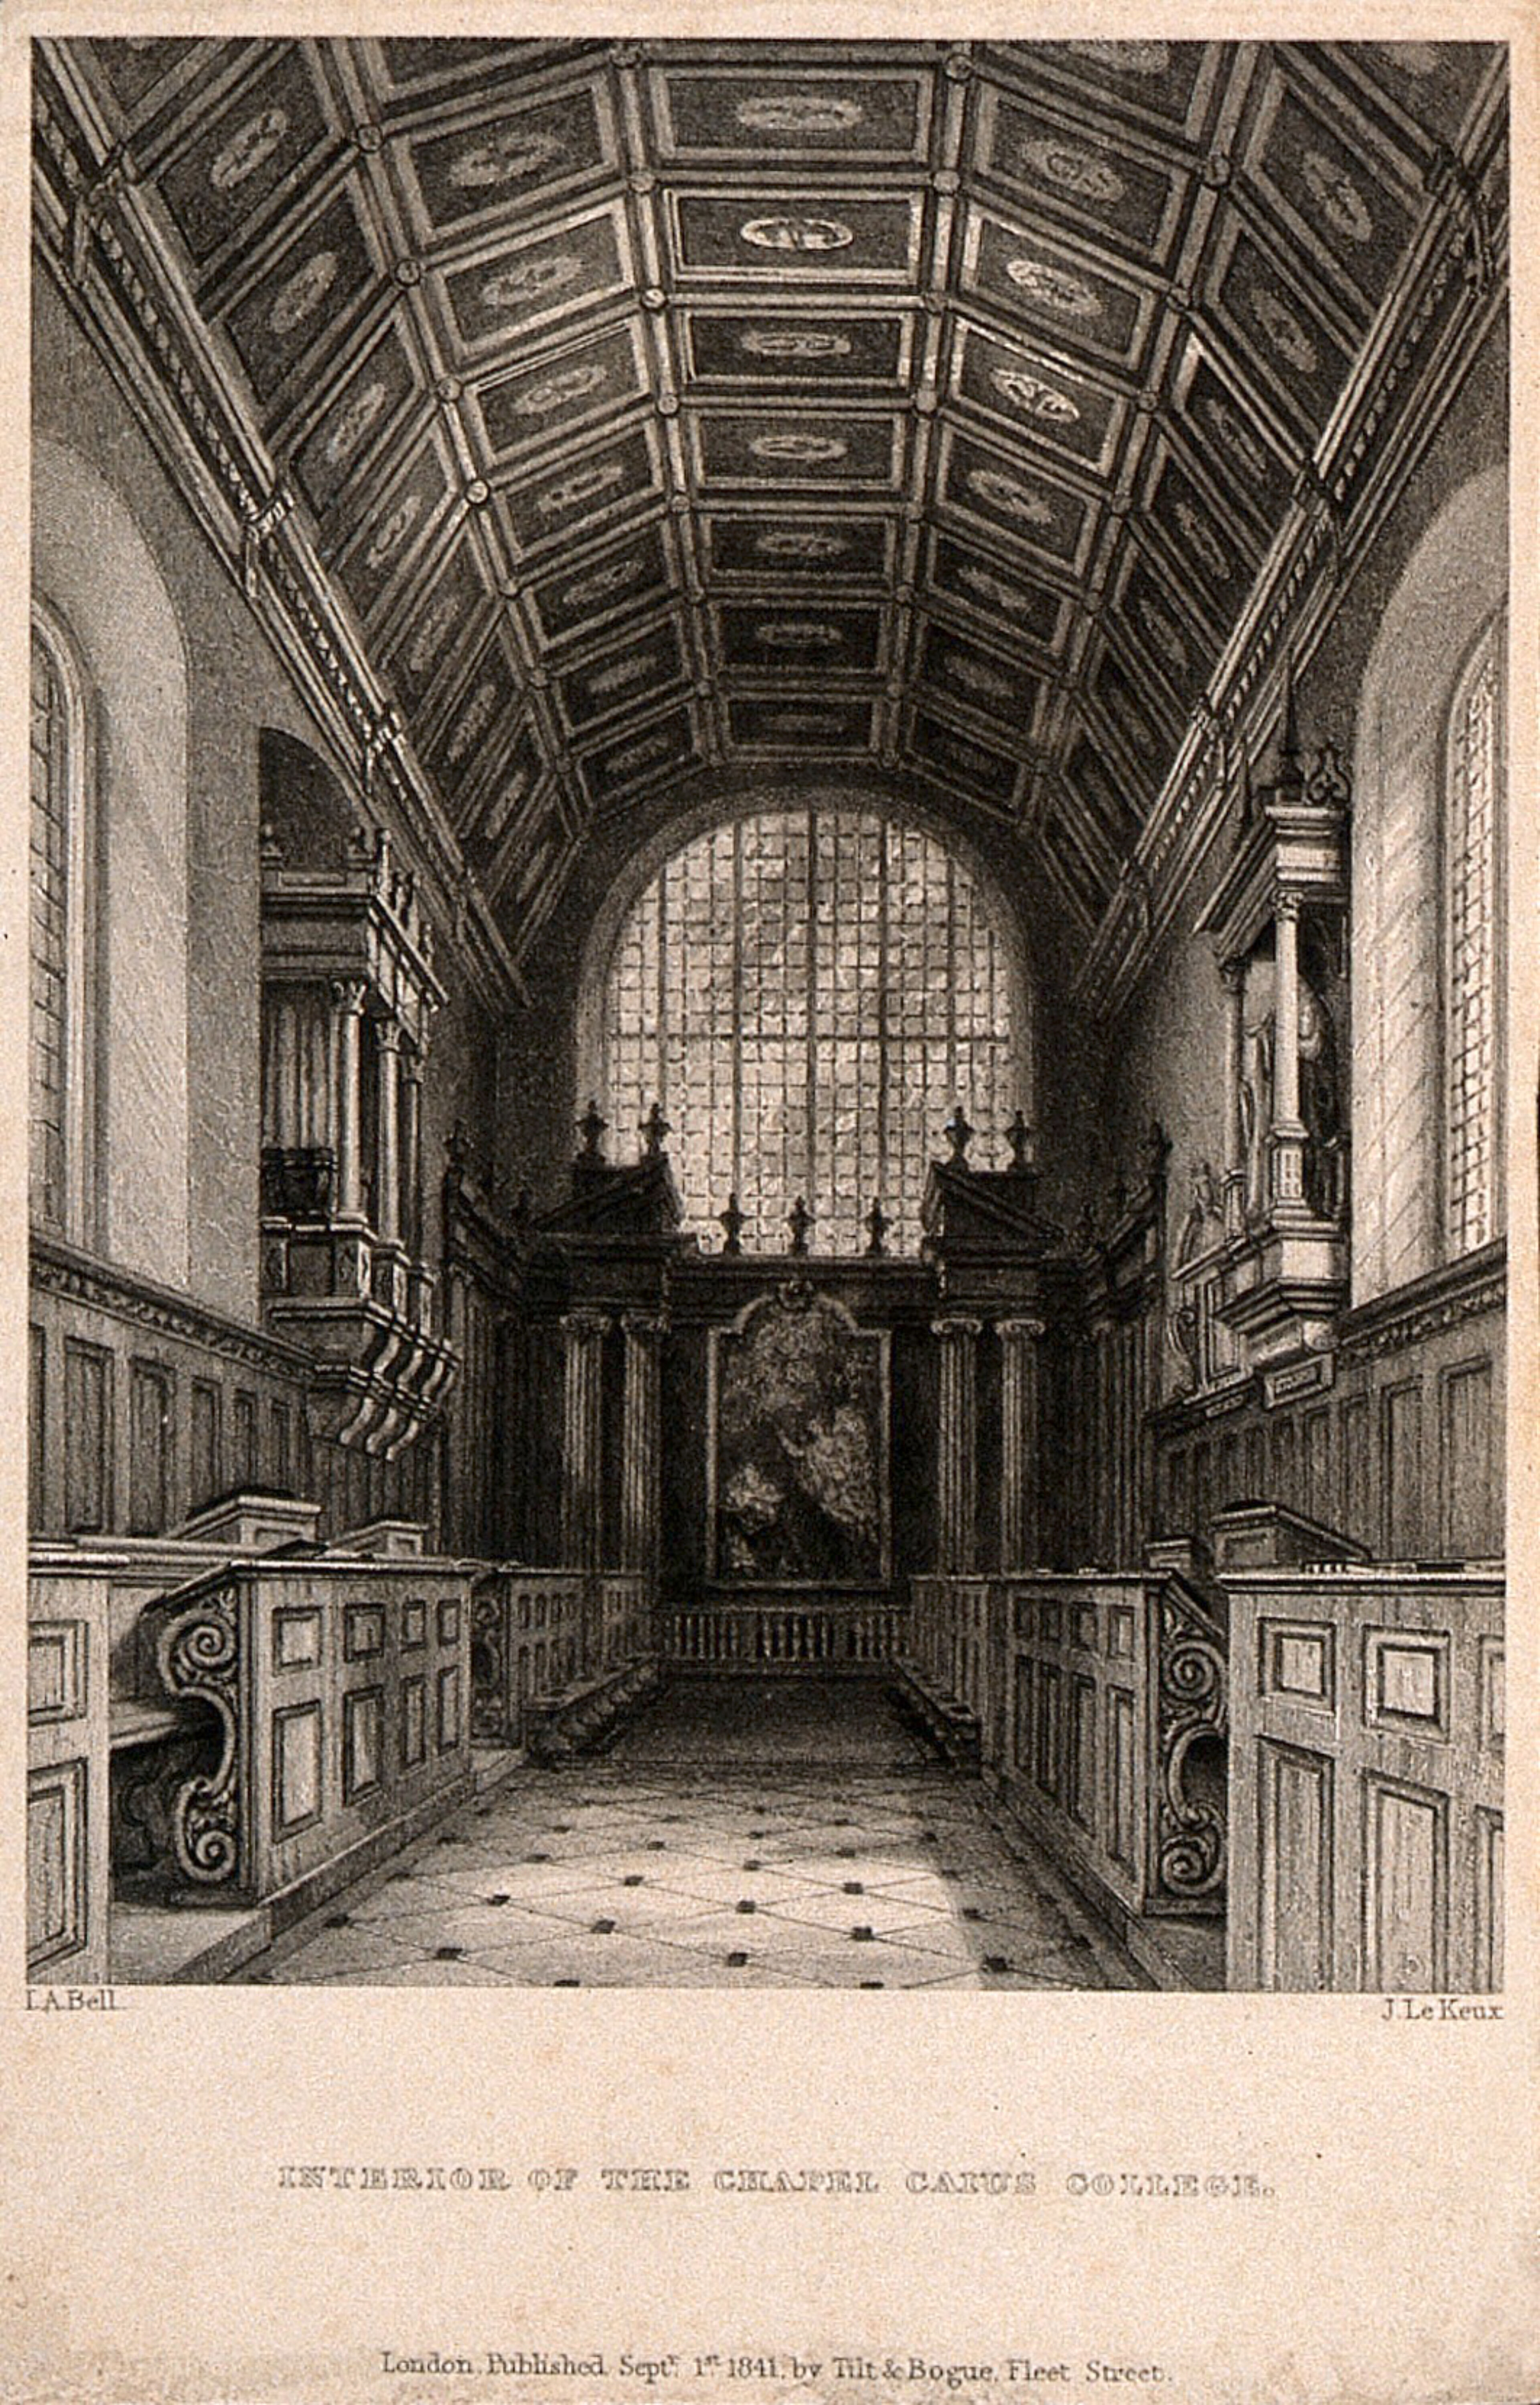 Gonville and Caius College chapel, Cambridge. Line engraving by J. Le Keux, 1841, after J.A. Bell.